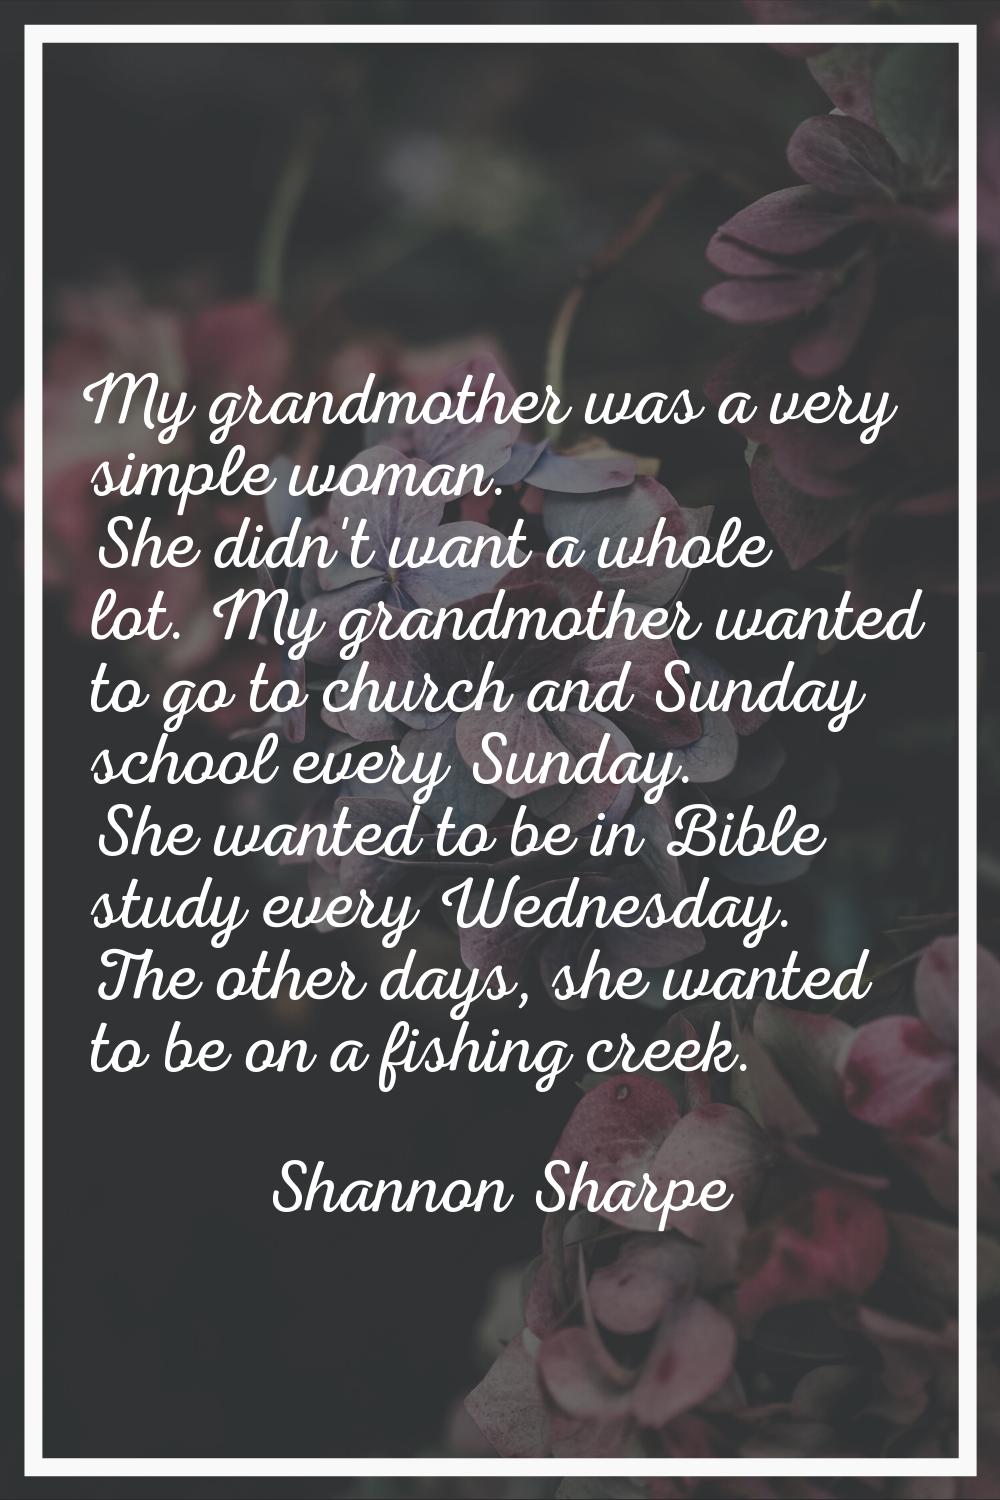 My grandmother was a very simple woman. She didn't want a whole lot. My grandmother wanted to go to